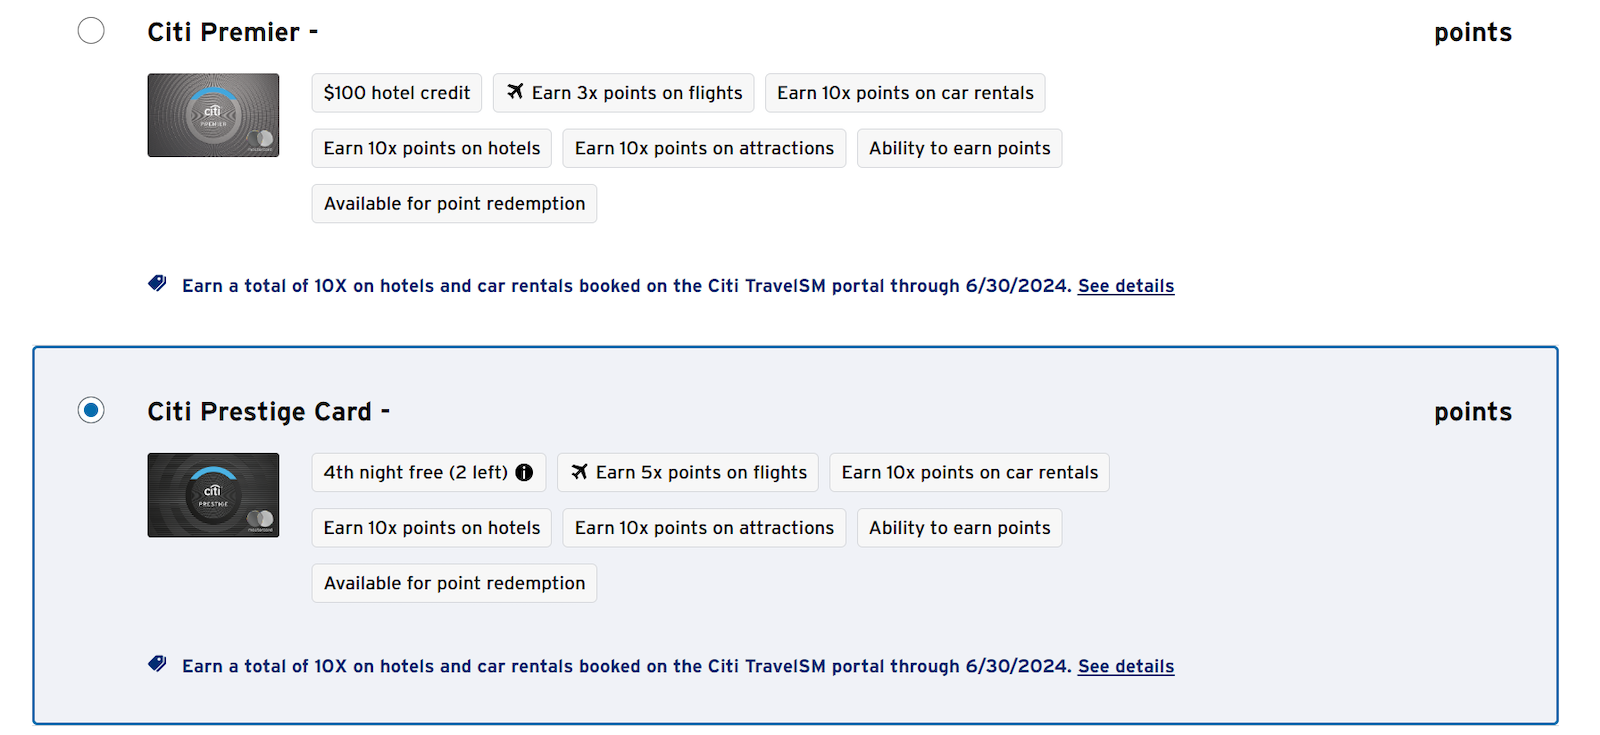 Screenshot of page showing Citi Premier and Citi Prestige cards and their associated benefits in the Citi travel portal